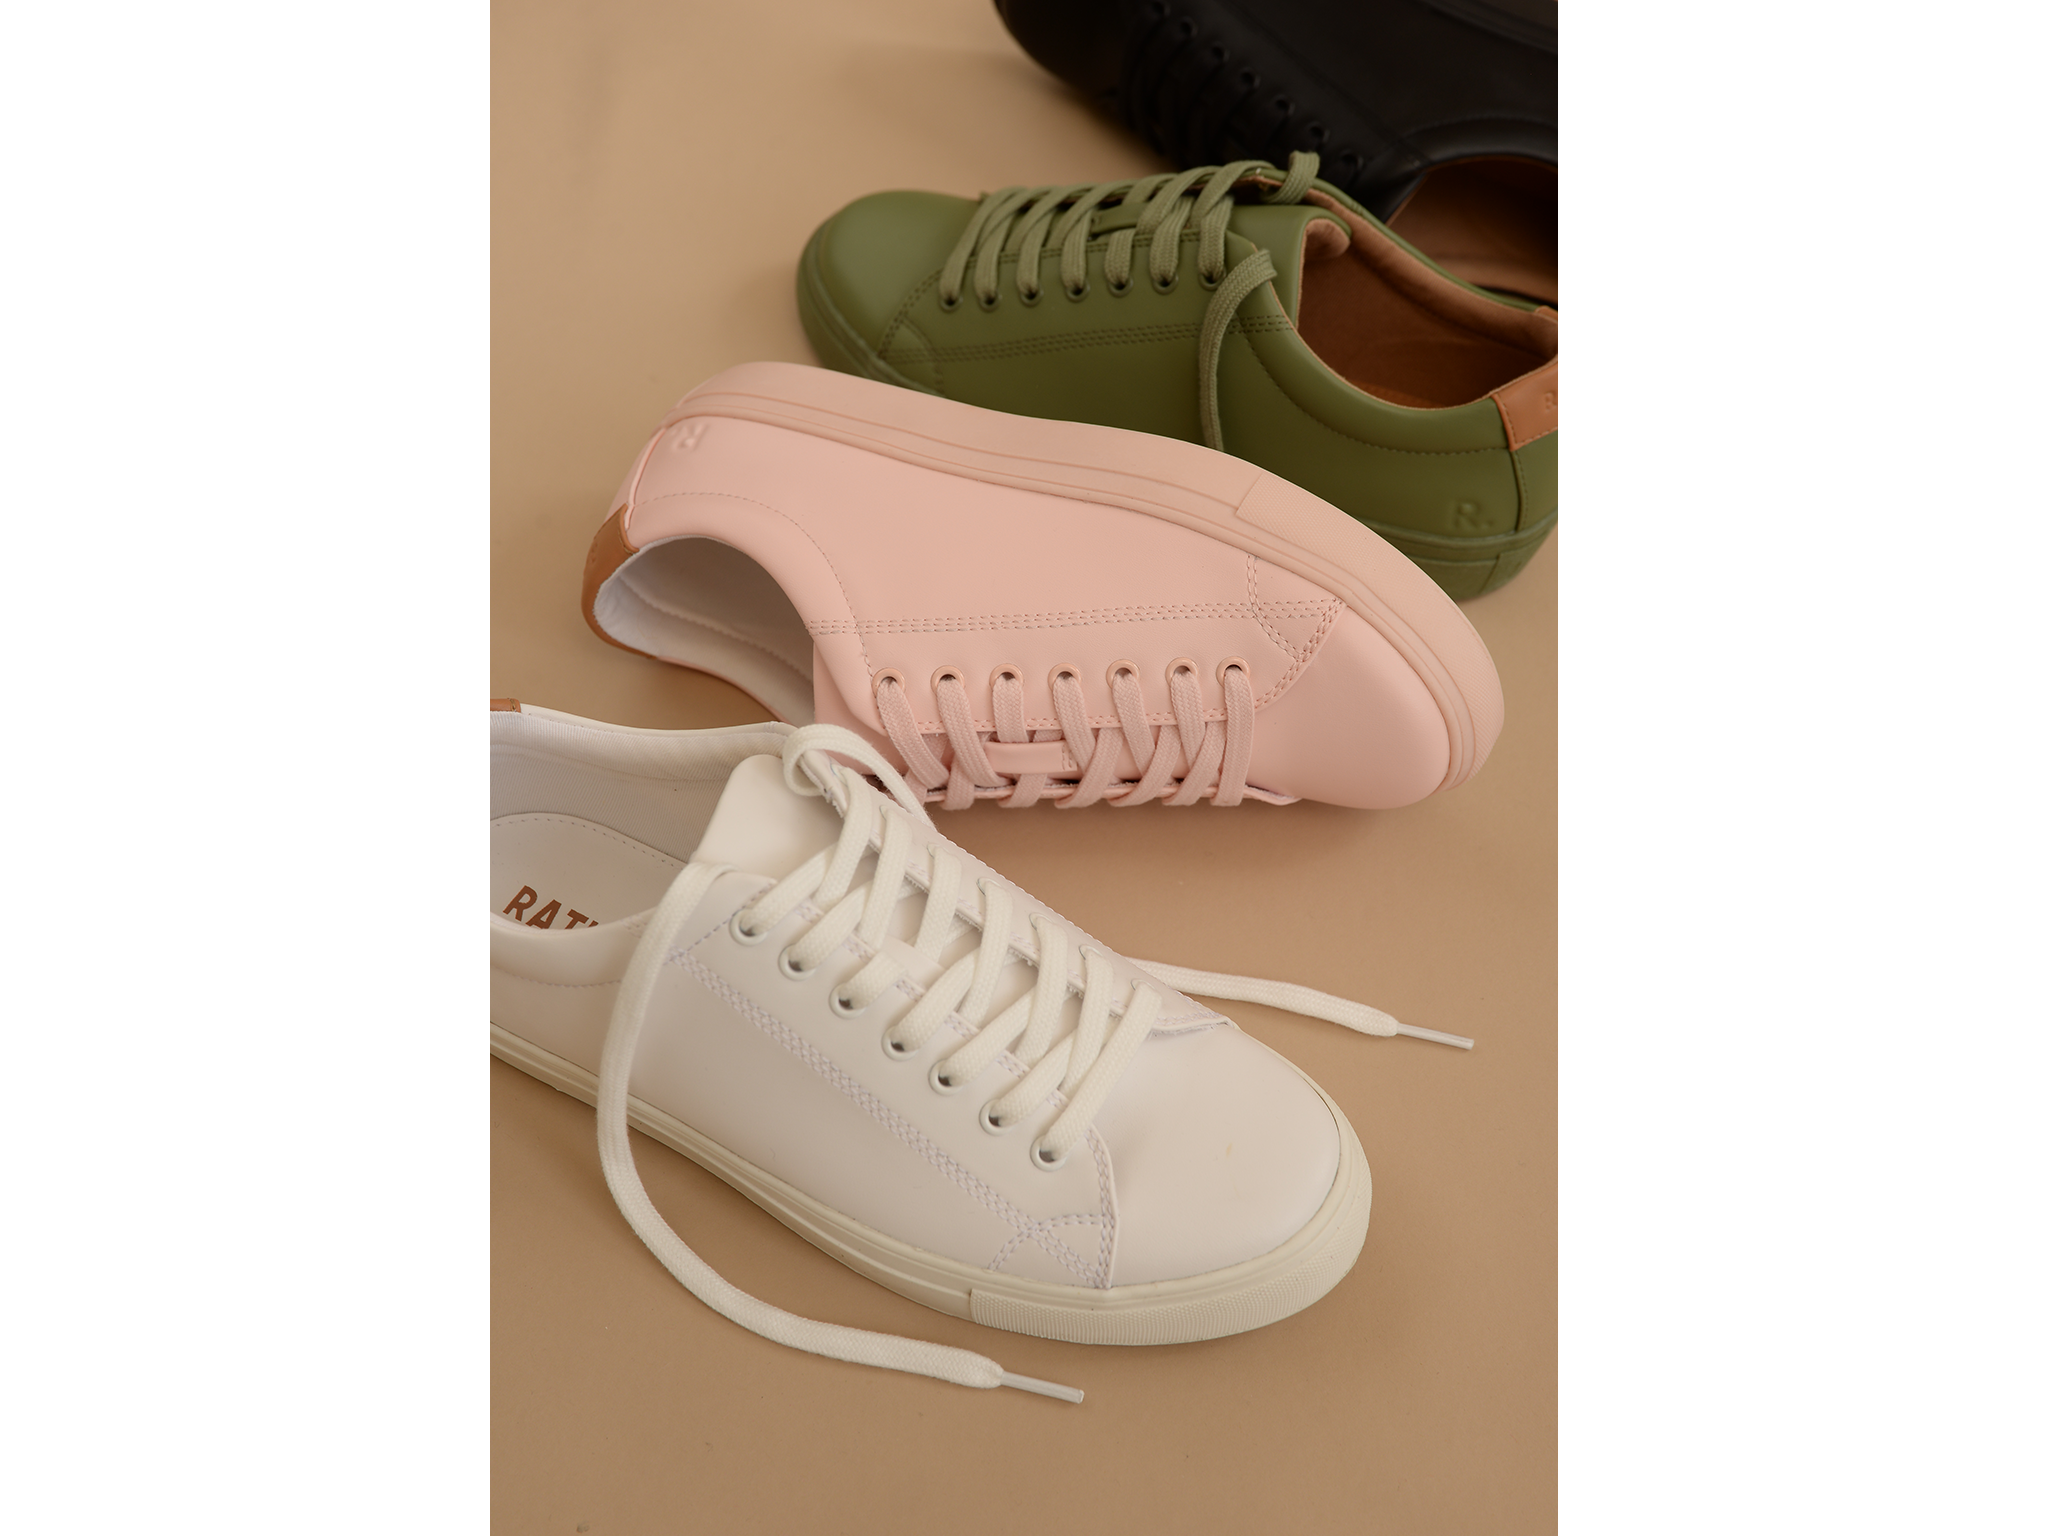 Unisex Casual High-Top Skate Shoes Classic Sneakers Adults Trainers Colorful Weed Marijuana Leaves